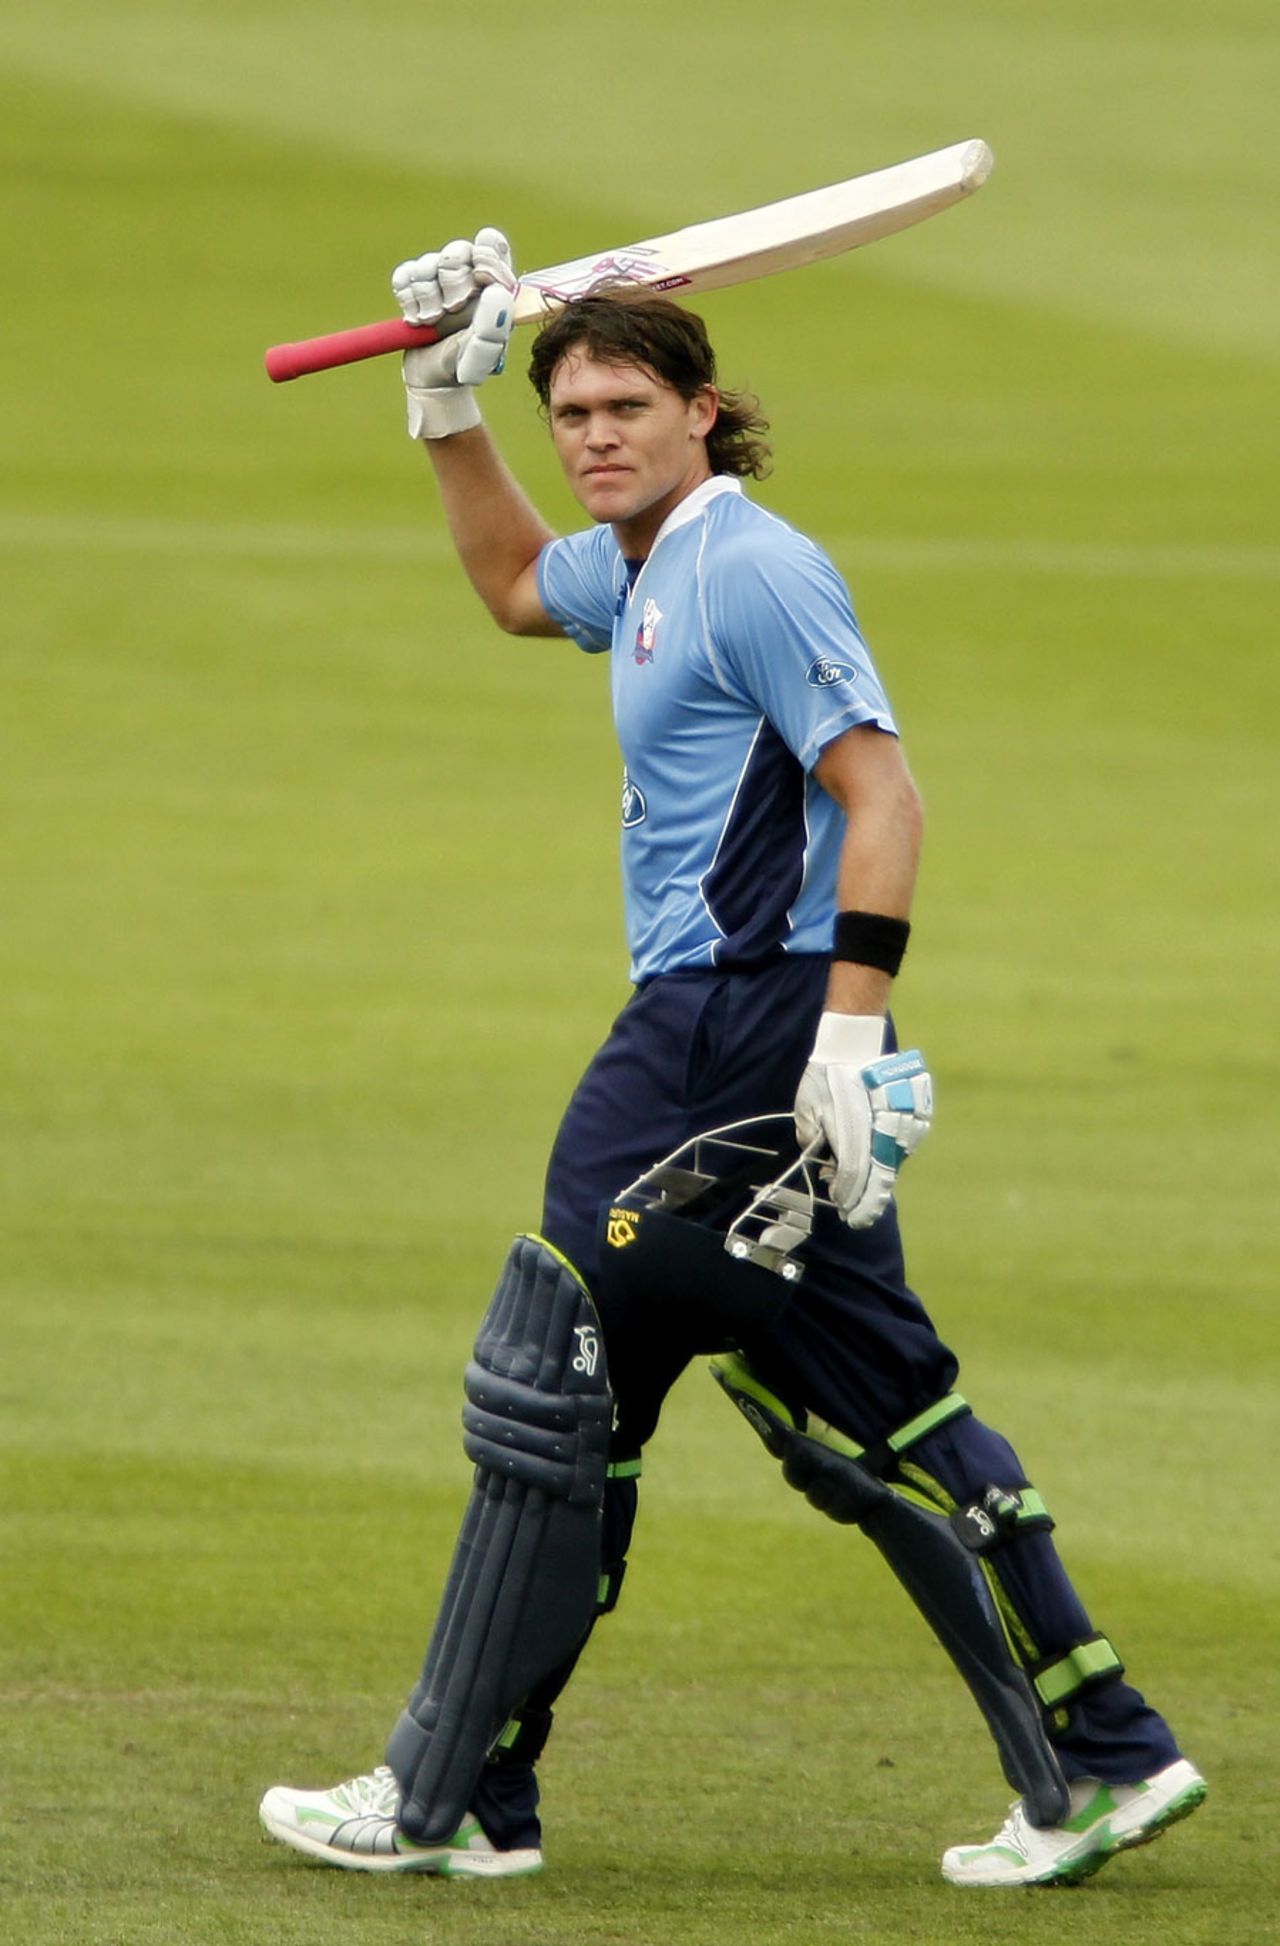 Auckland Aces' Lou Vincent celebrates his century in the final of the New Zealand domestic one-day competition, Canterbury Wizards v Auckland Aces, Chirstchurch, February 13, 2011